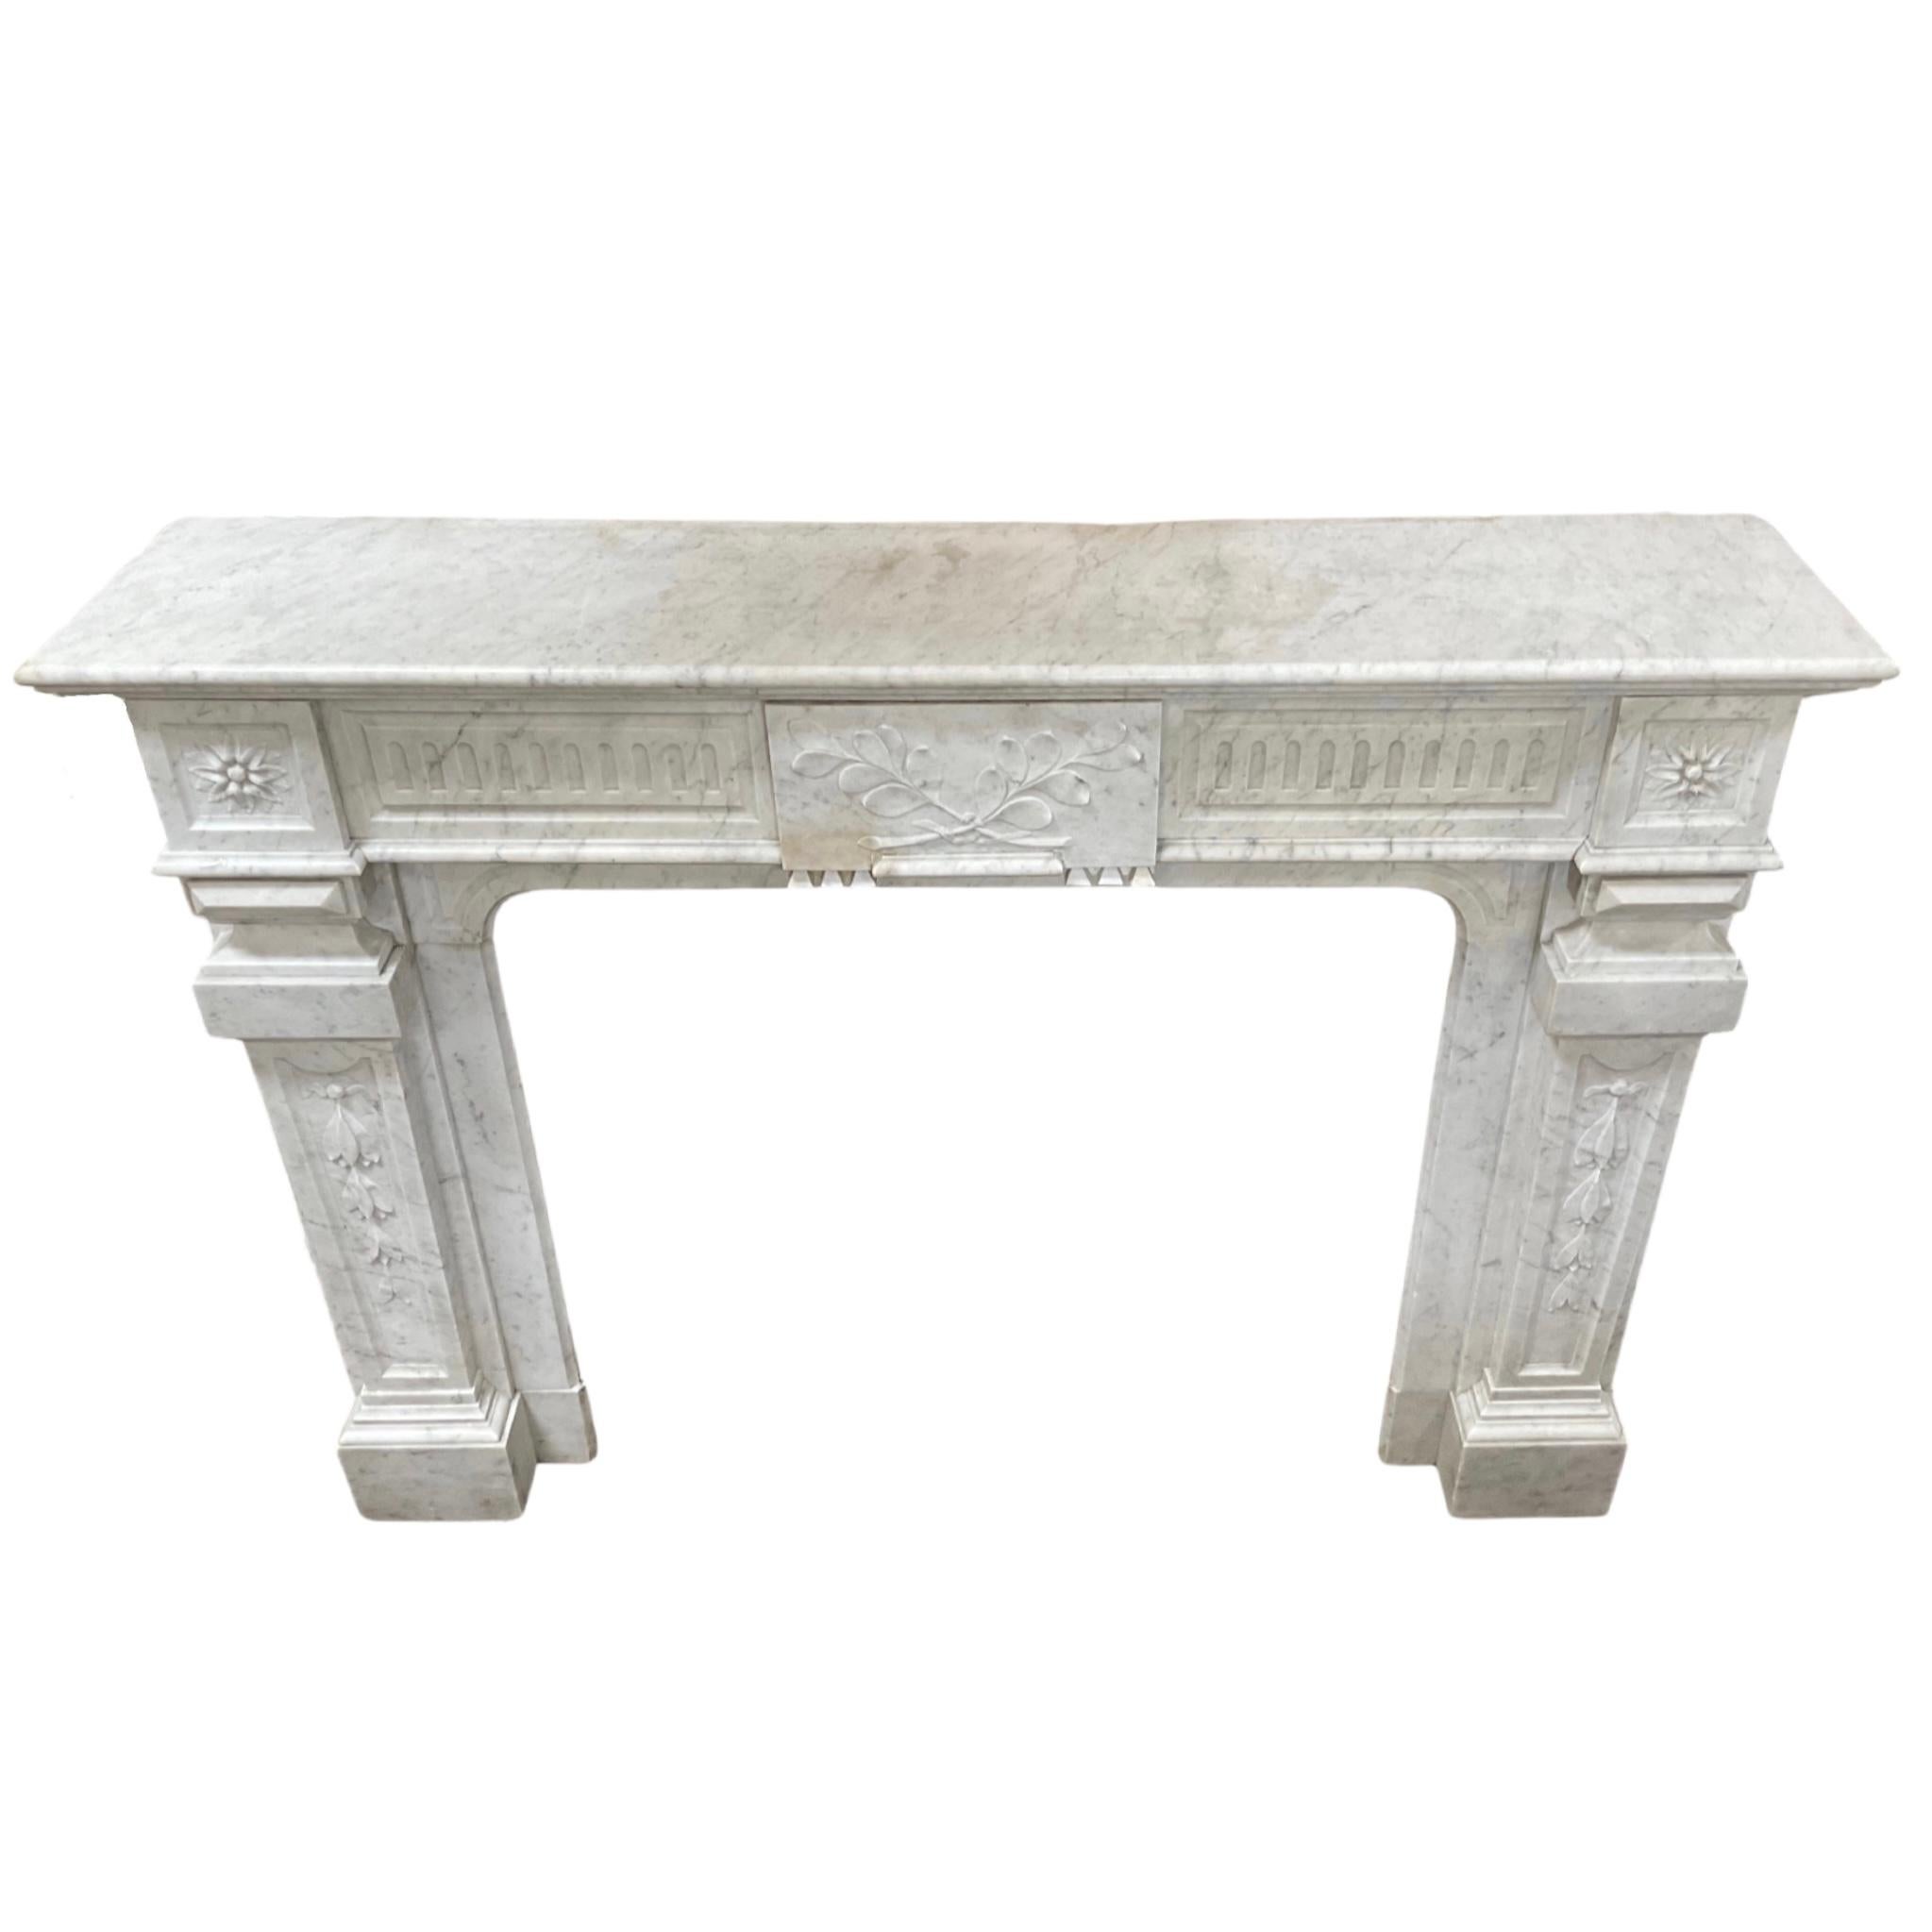 This antique Louis XVI style mantel, crafted in France during the 1880s, features a white marble construction for a classic and timeless look. Reinforcing this time-honored style, the mantel is sure to be an elegant accent to any room.